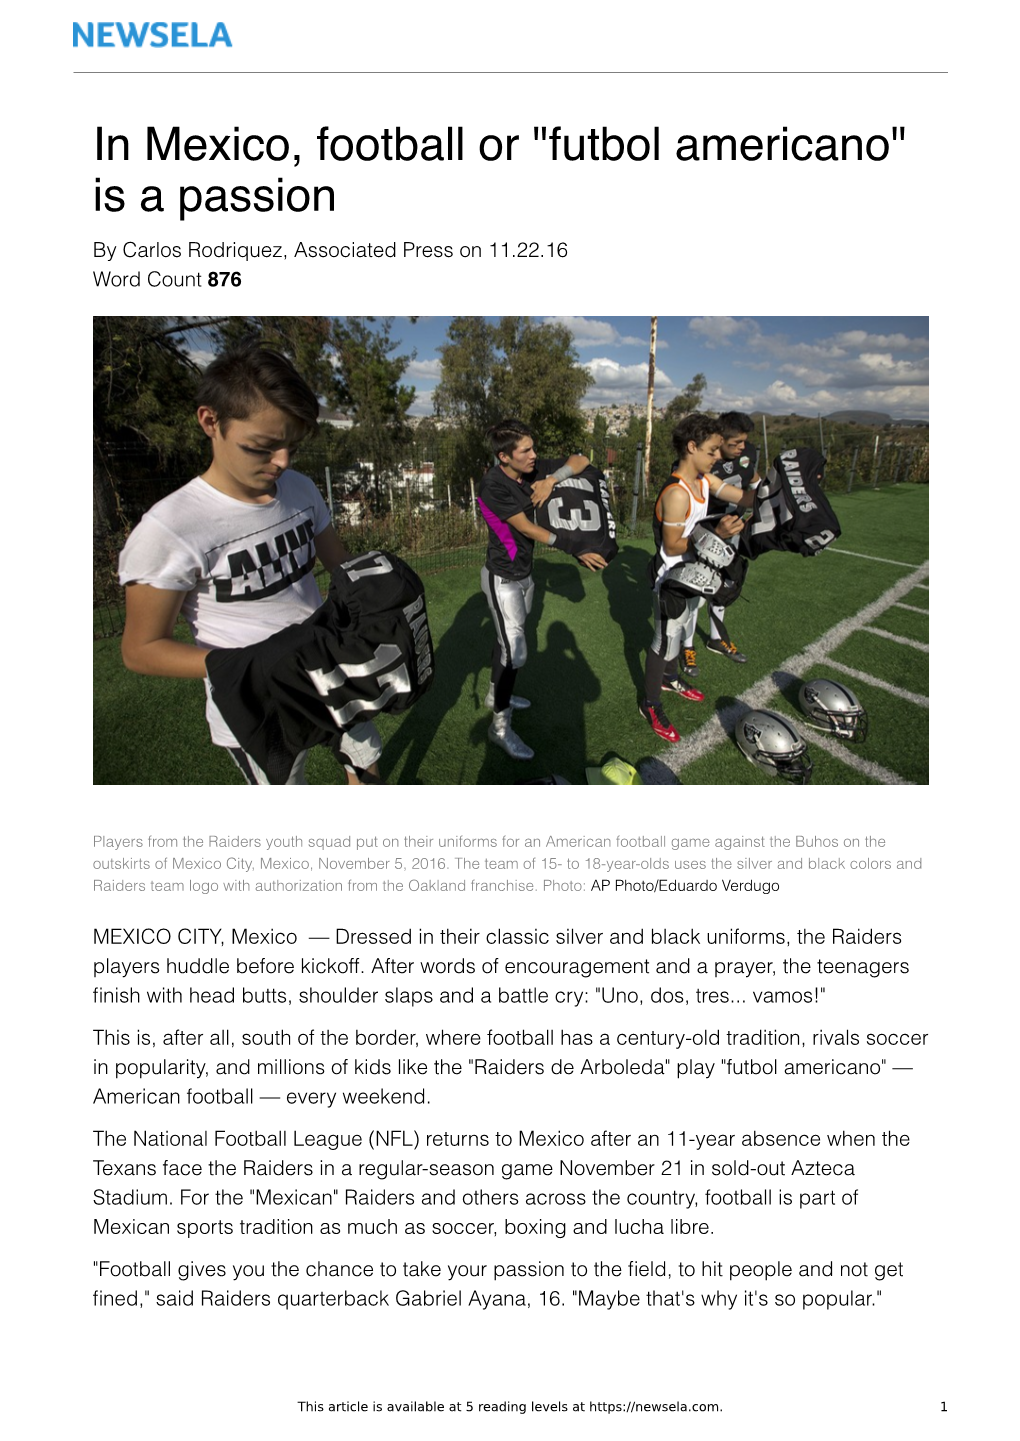 In Mexico, Football Or "Futbol Americano" Is a Passion by Carlos Rodriquez, Associated Press on 11.22.16 Word Count 876